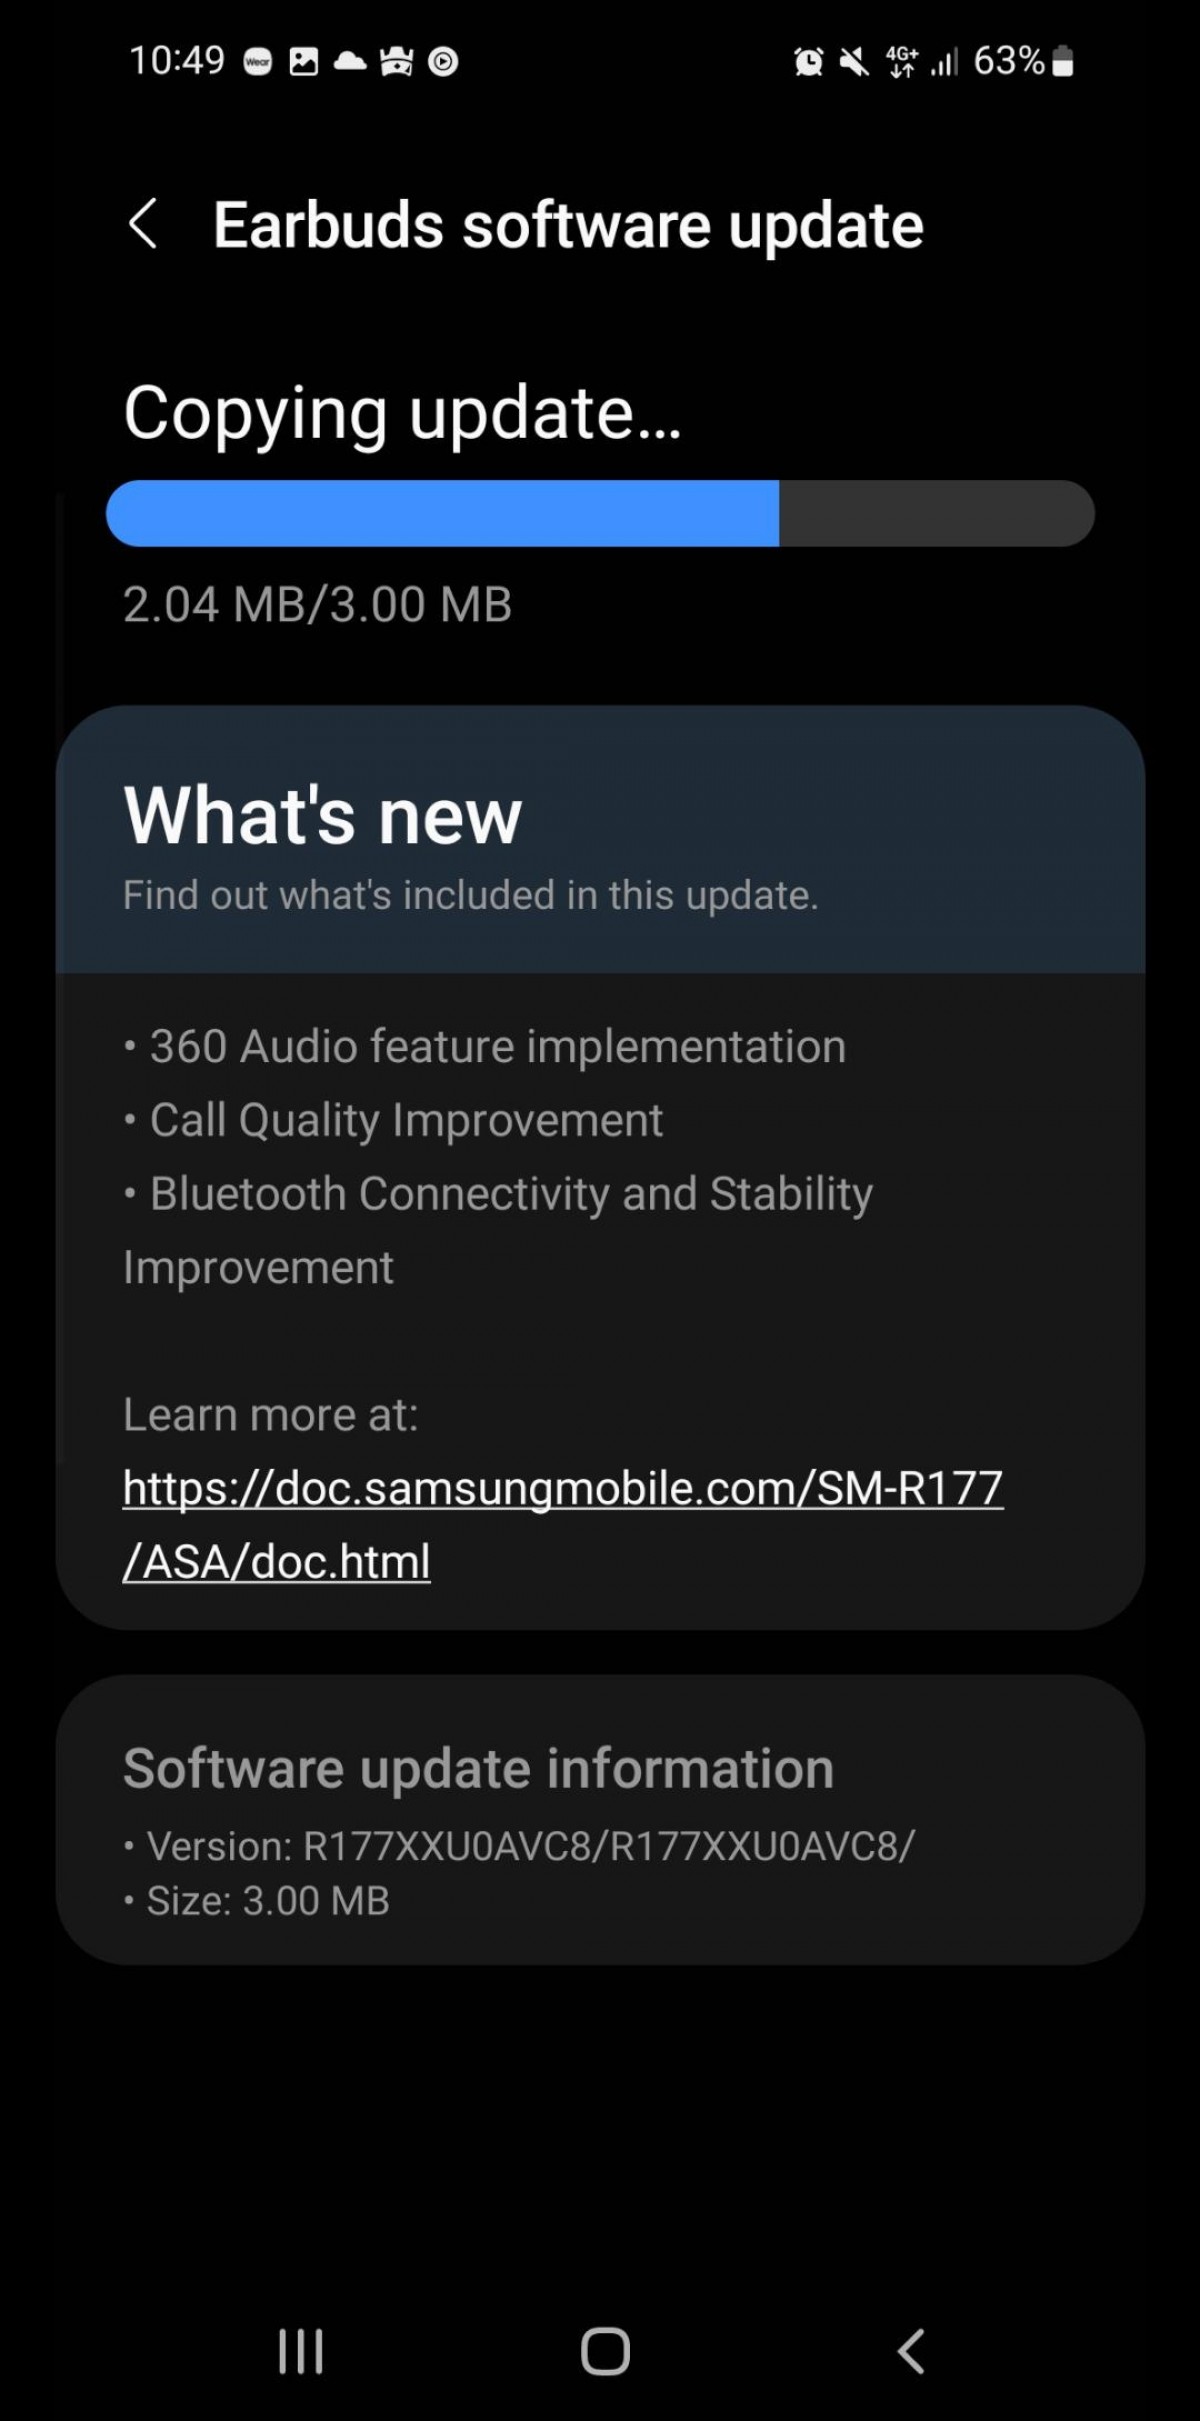 Samsung Galaxy Buds 2 and Buds Live gets 360 Audio in new software update